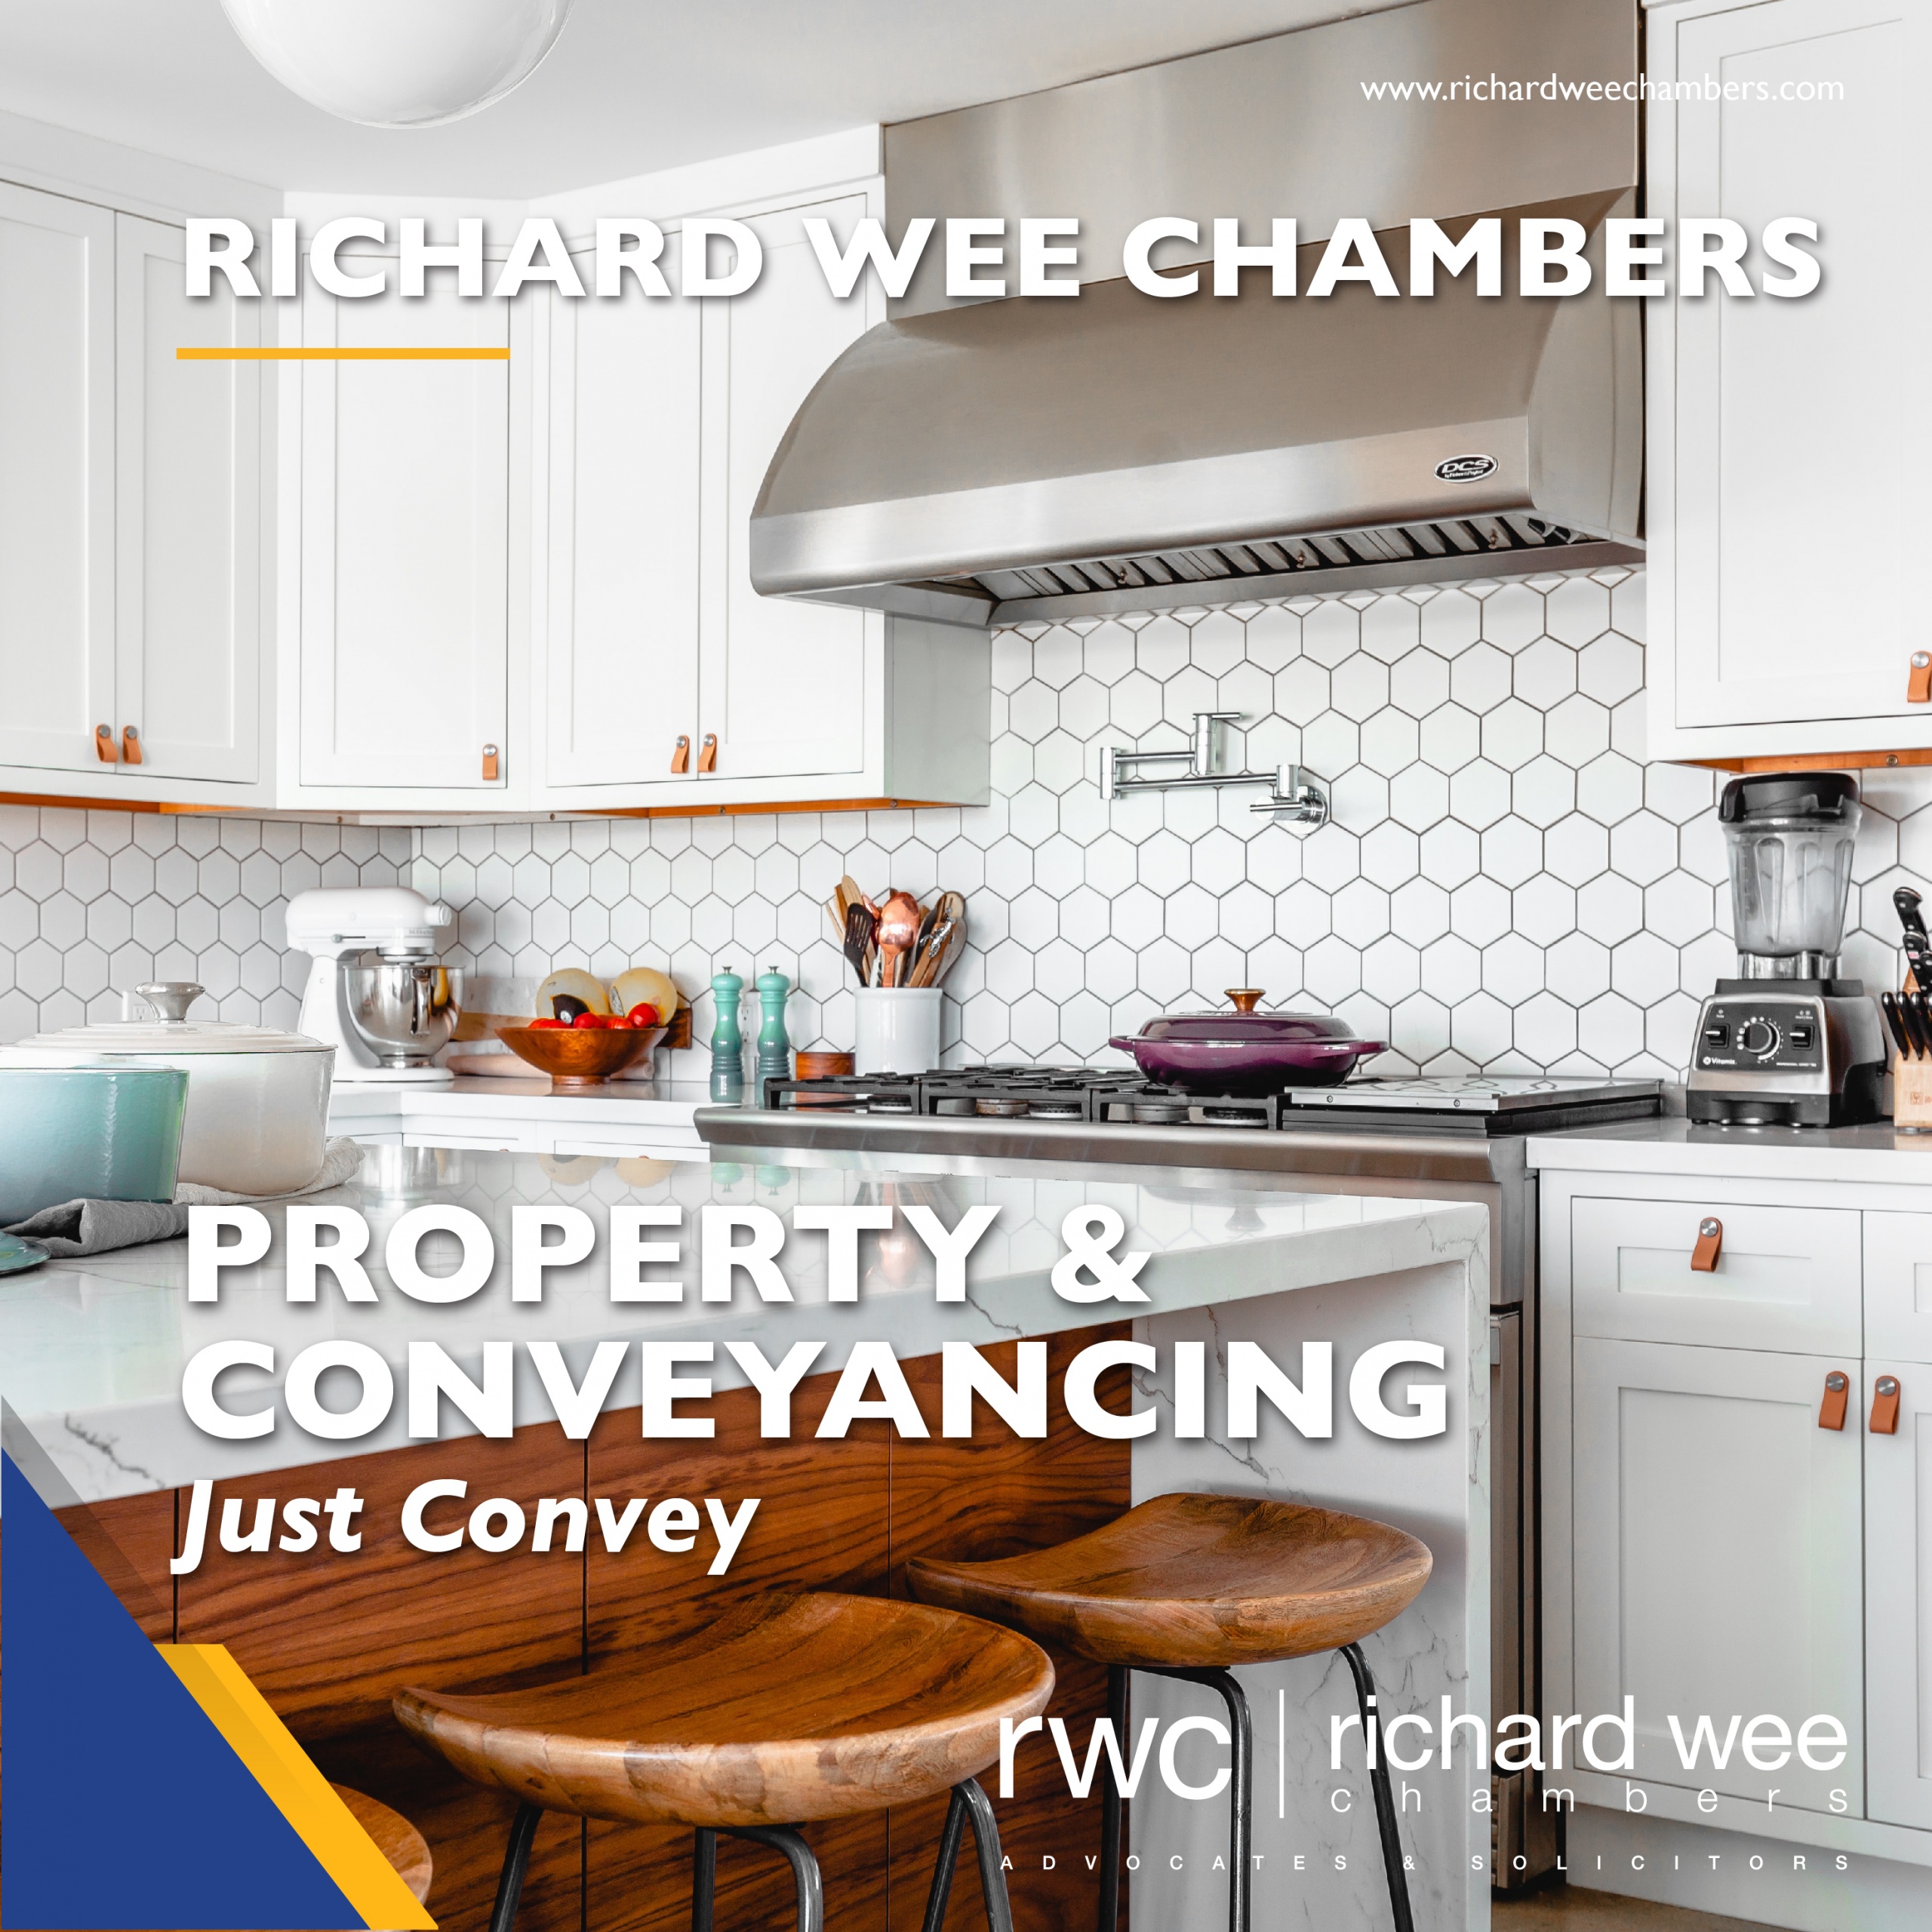 What are the legal fees for a Sale & Purchase Agreement of a Property? - Richard Wee Chambers